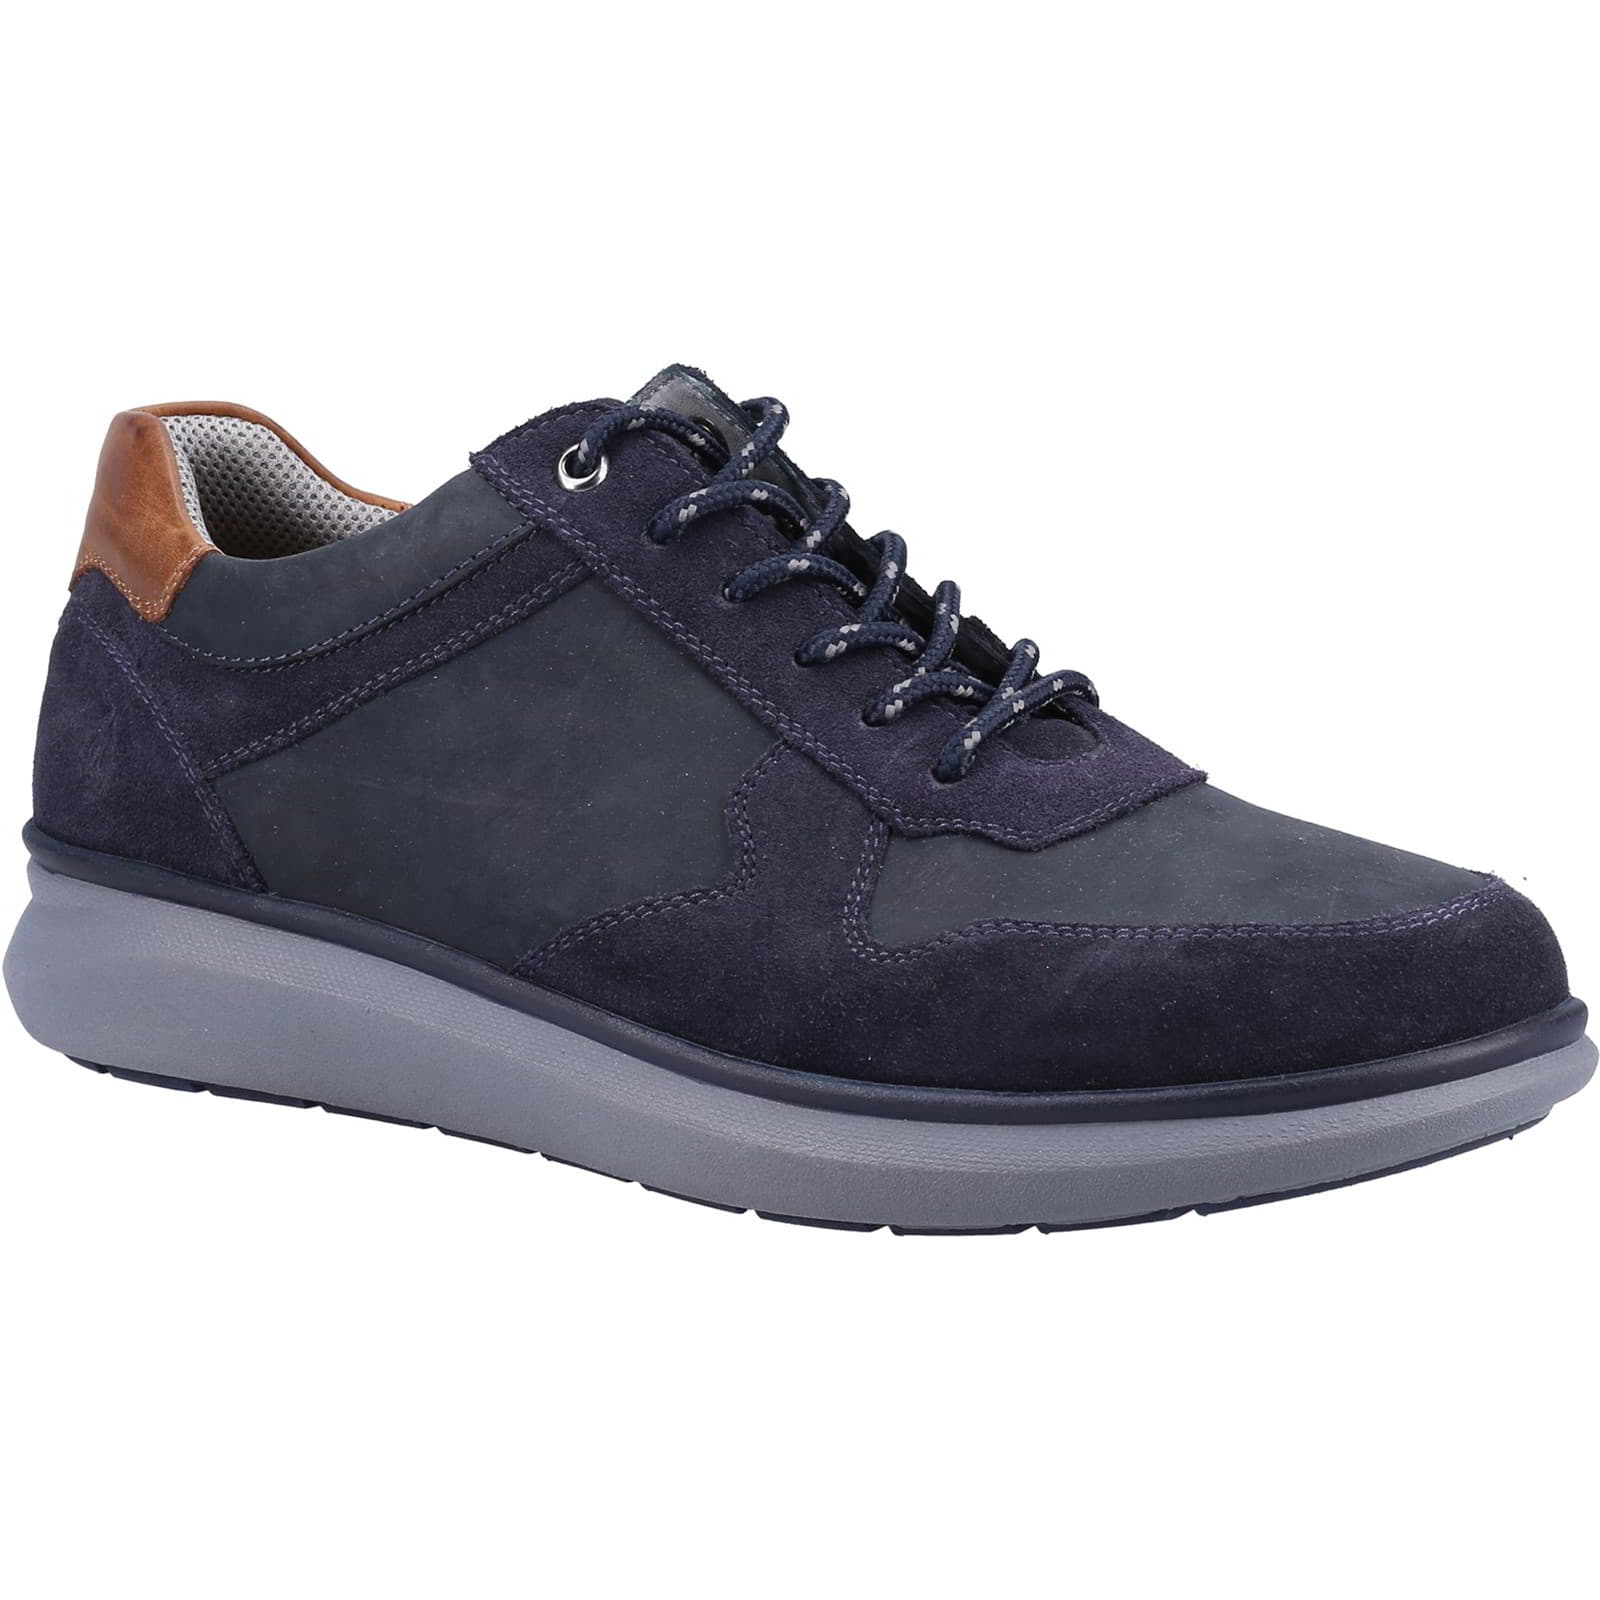 Hush Puppies Men's Braxton Lace Up Casual Trainers Shoes - UK 7